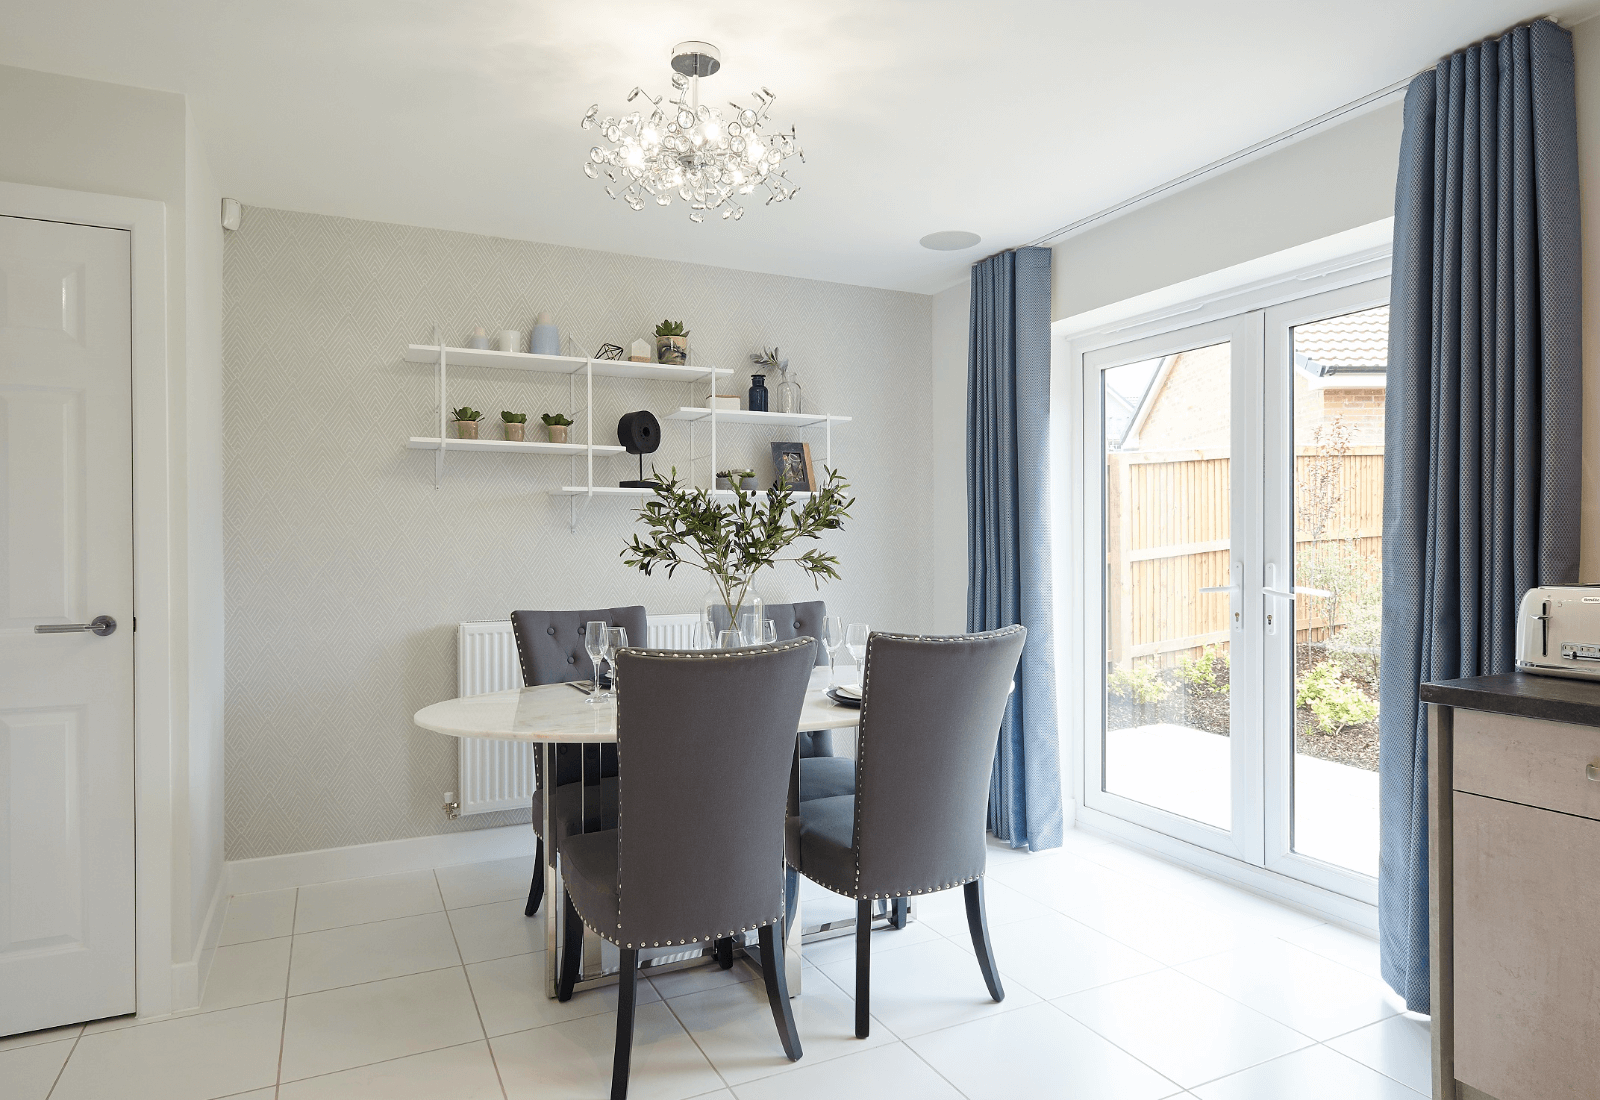 Typical Baycliffe Show Home - Kitchen/Dining